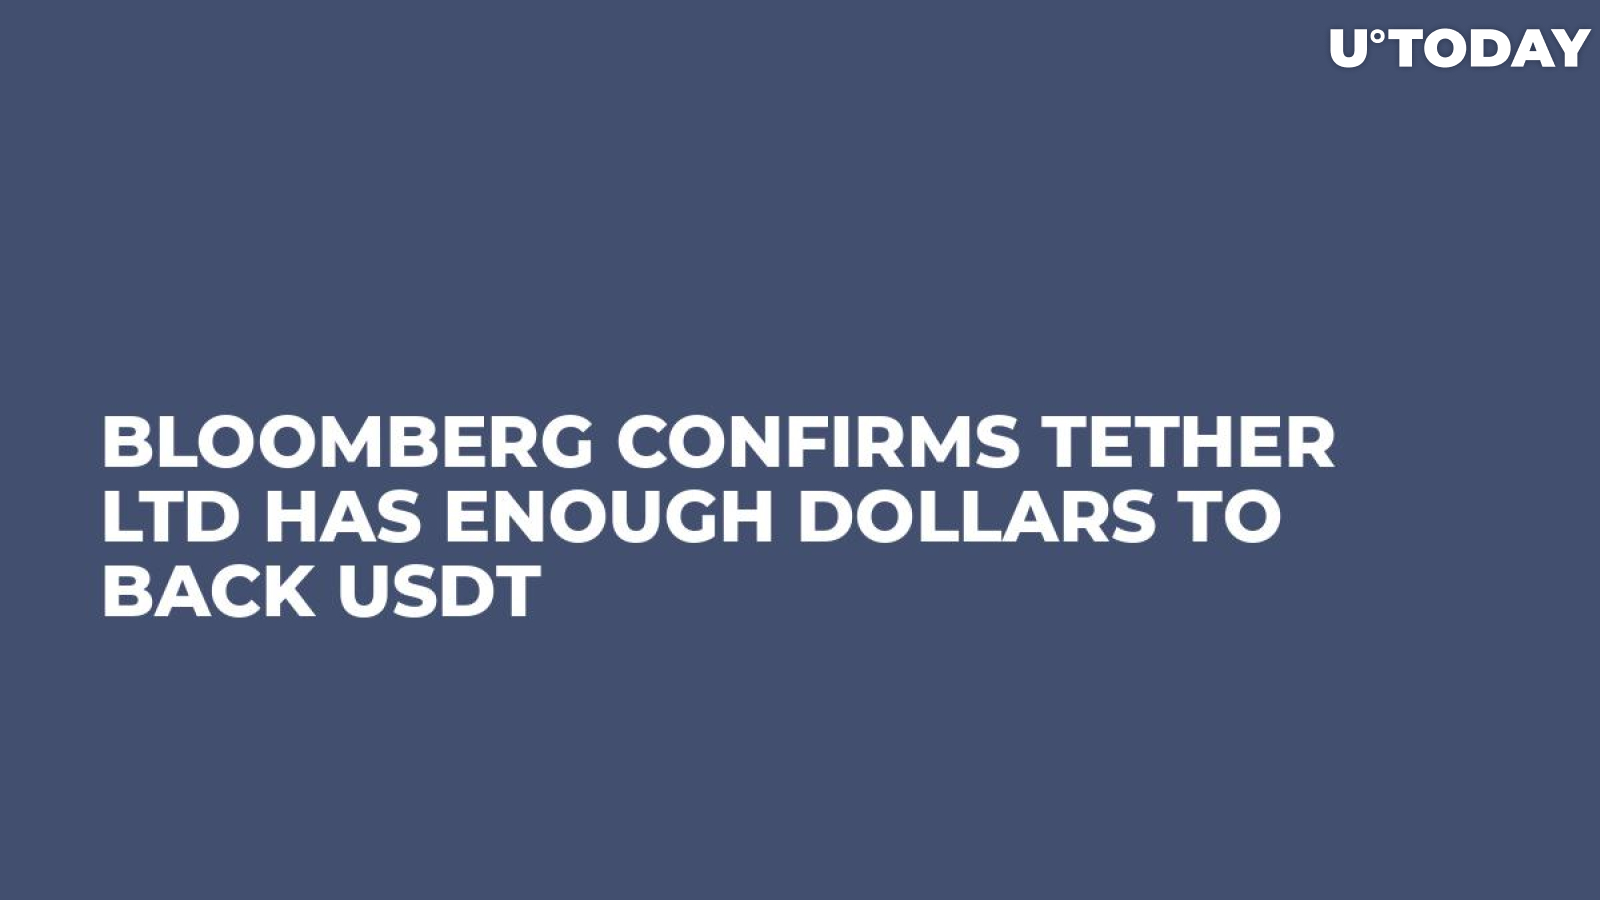 Bloomberg Confirms Tether Ltd Has Enough Dollars to Back USDT